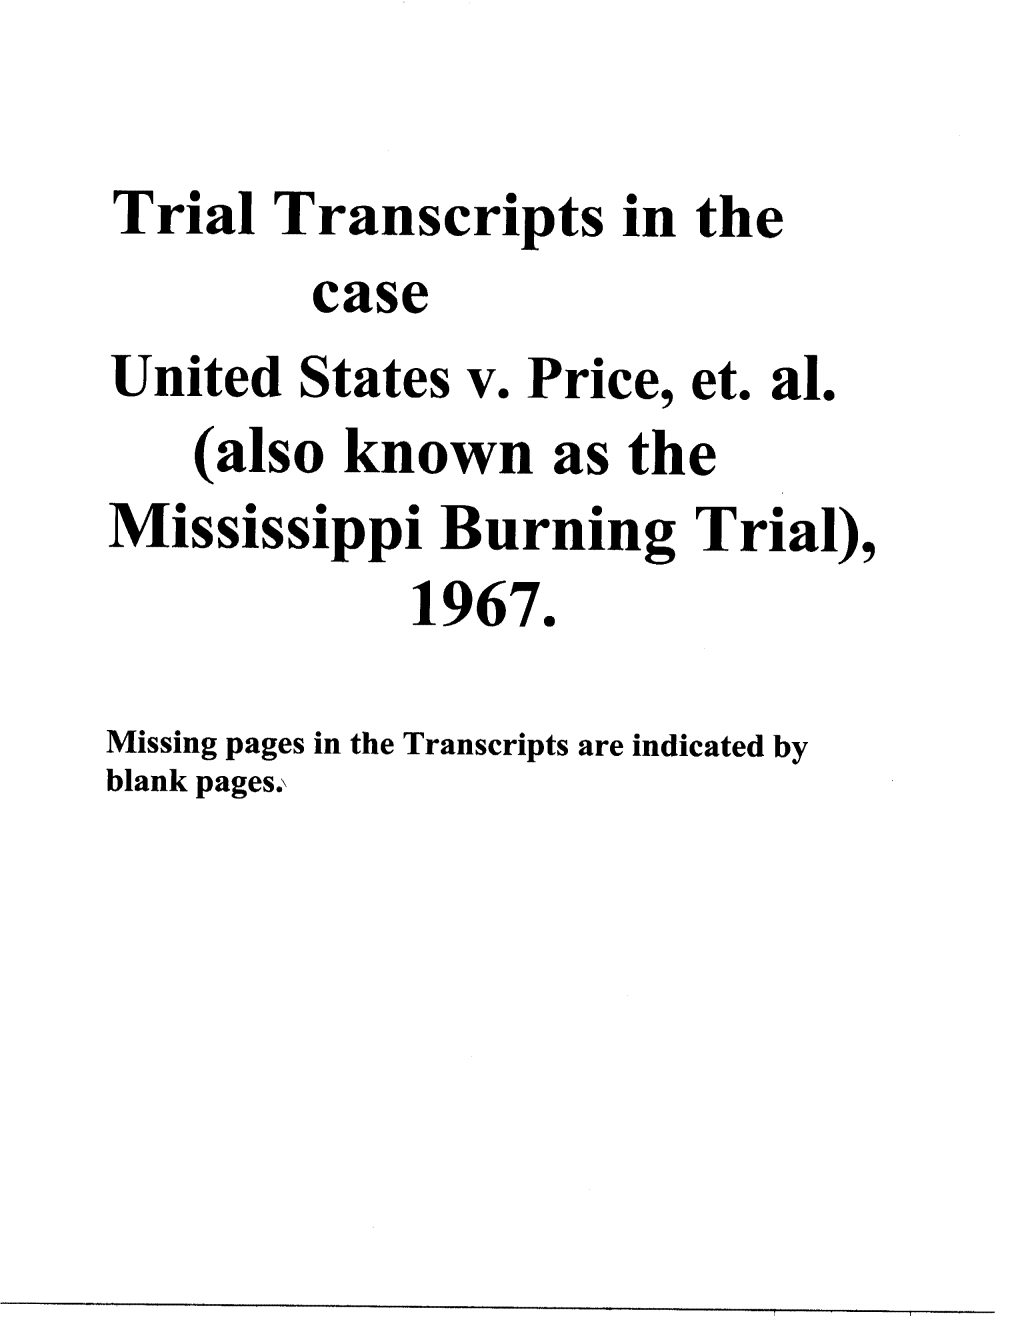 Also Known As the Mississippiburning Trial 1967